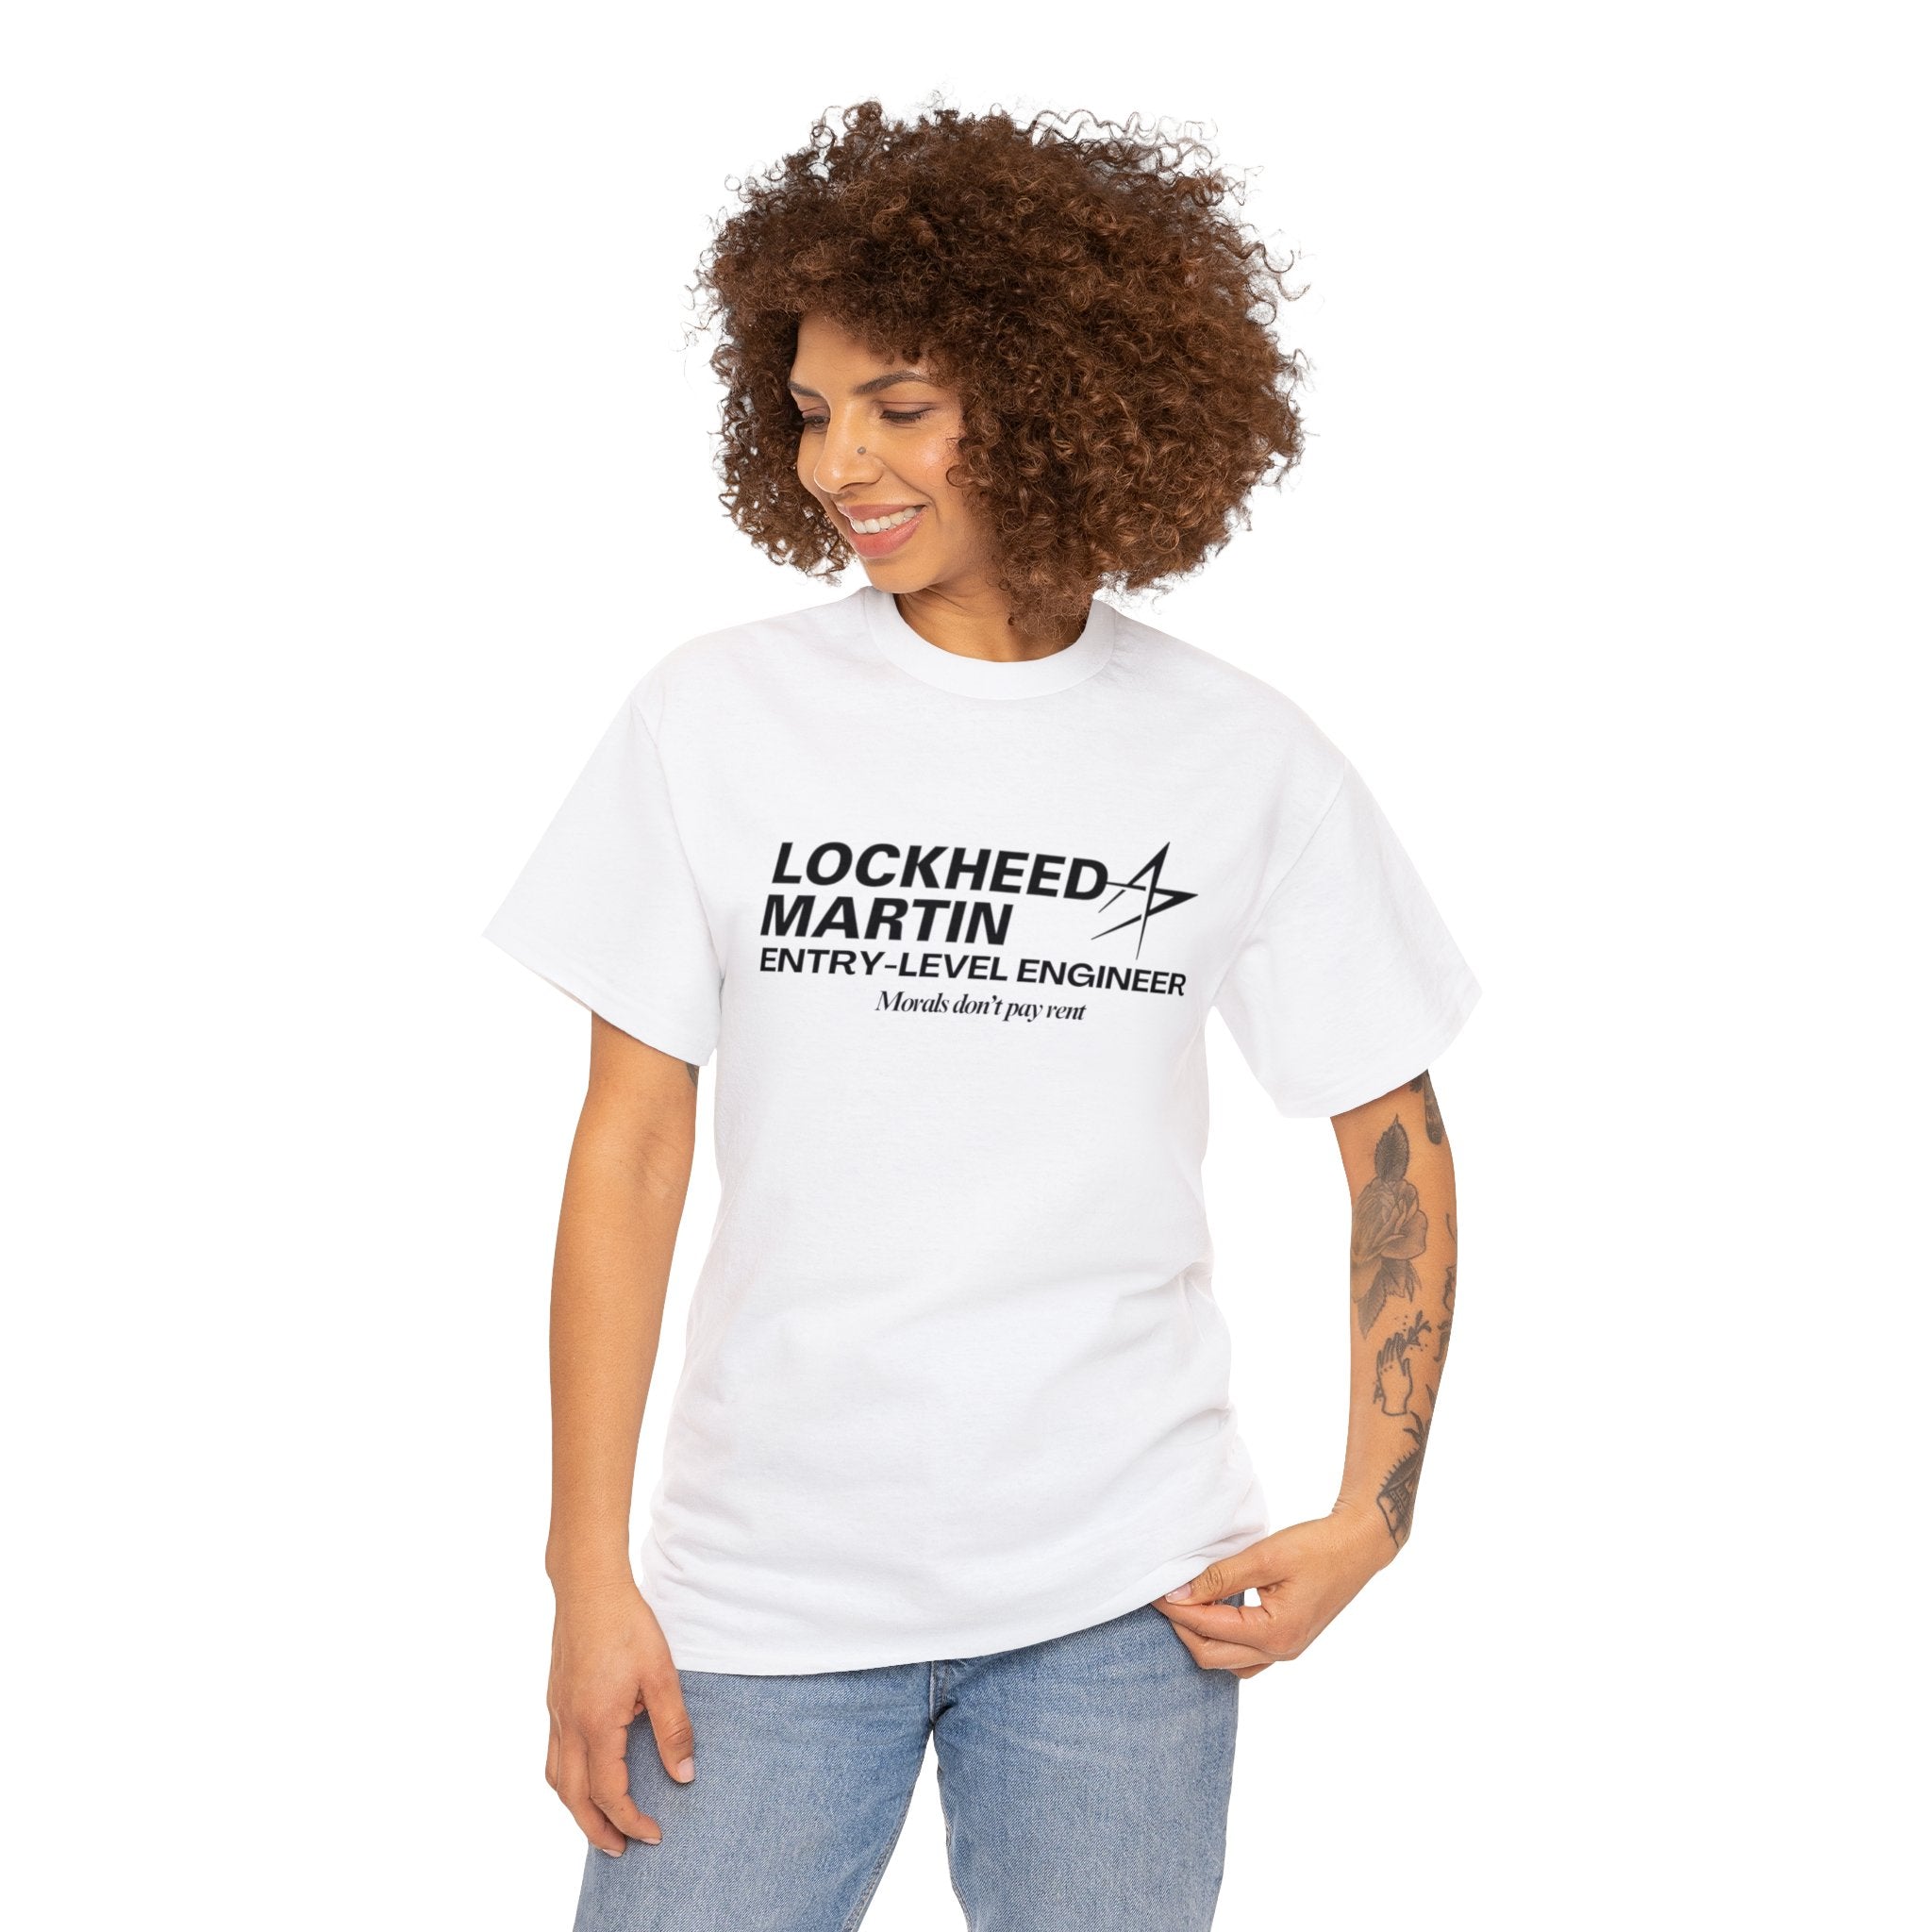 Lockheed Martin Entry Level Engineer (Morals don't pay rent) - Unisex Heavy Cotton Tee